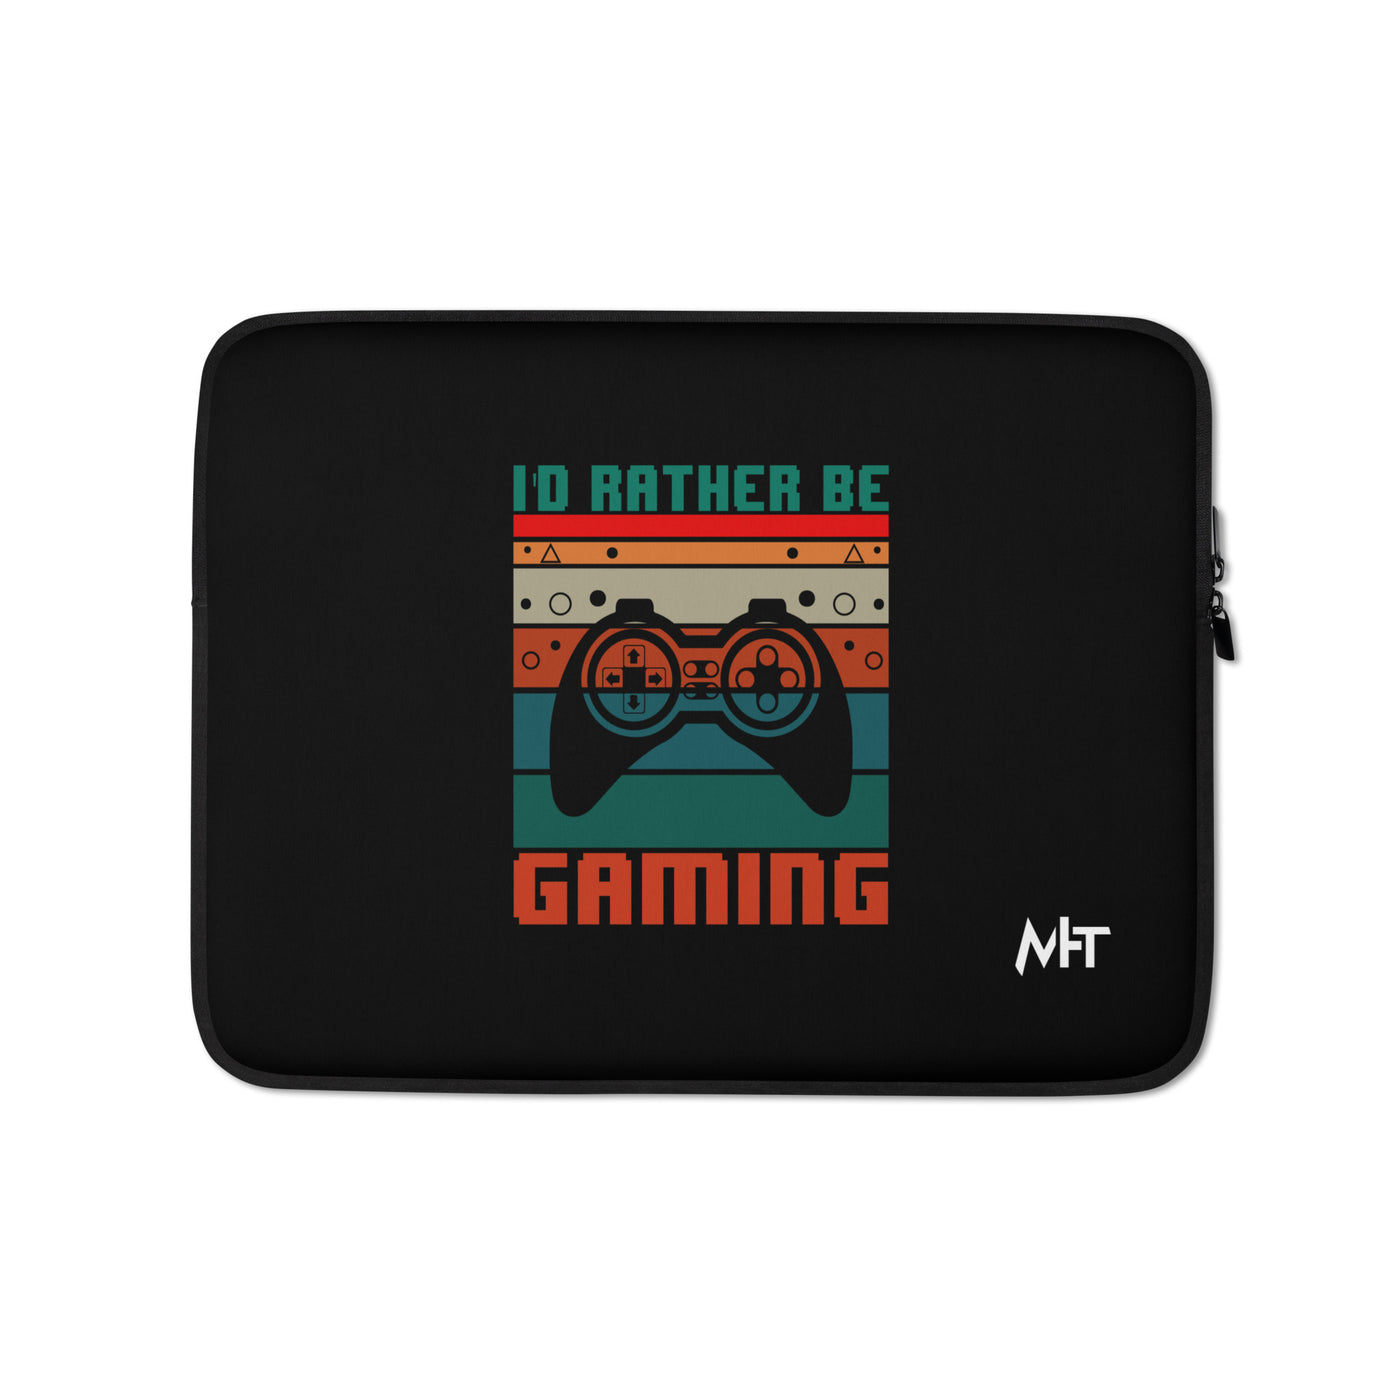 I'd rather be Gaming - Laptop Sleeve